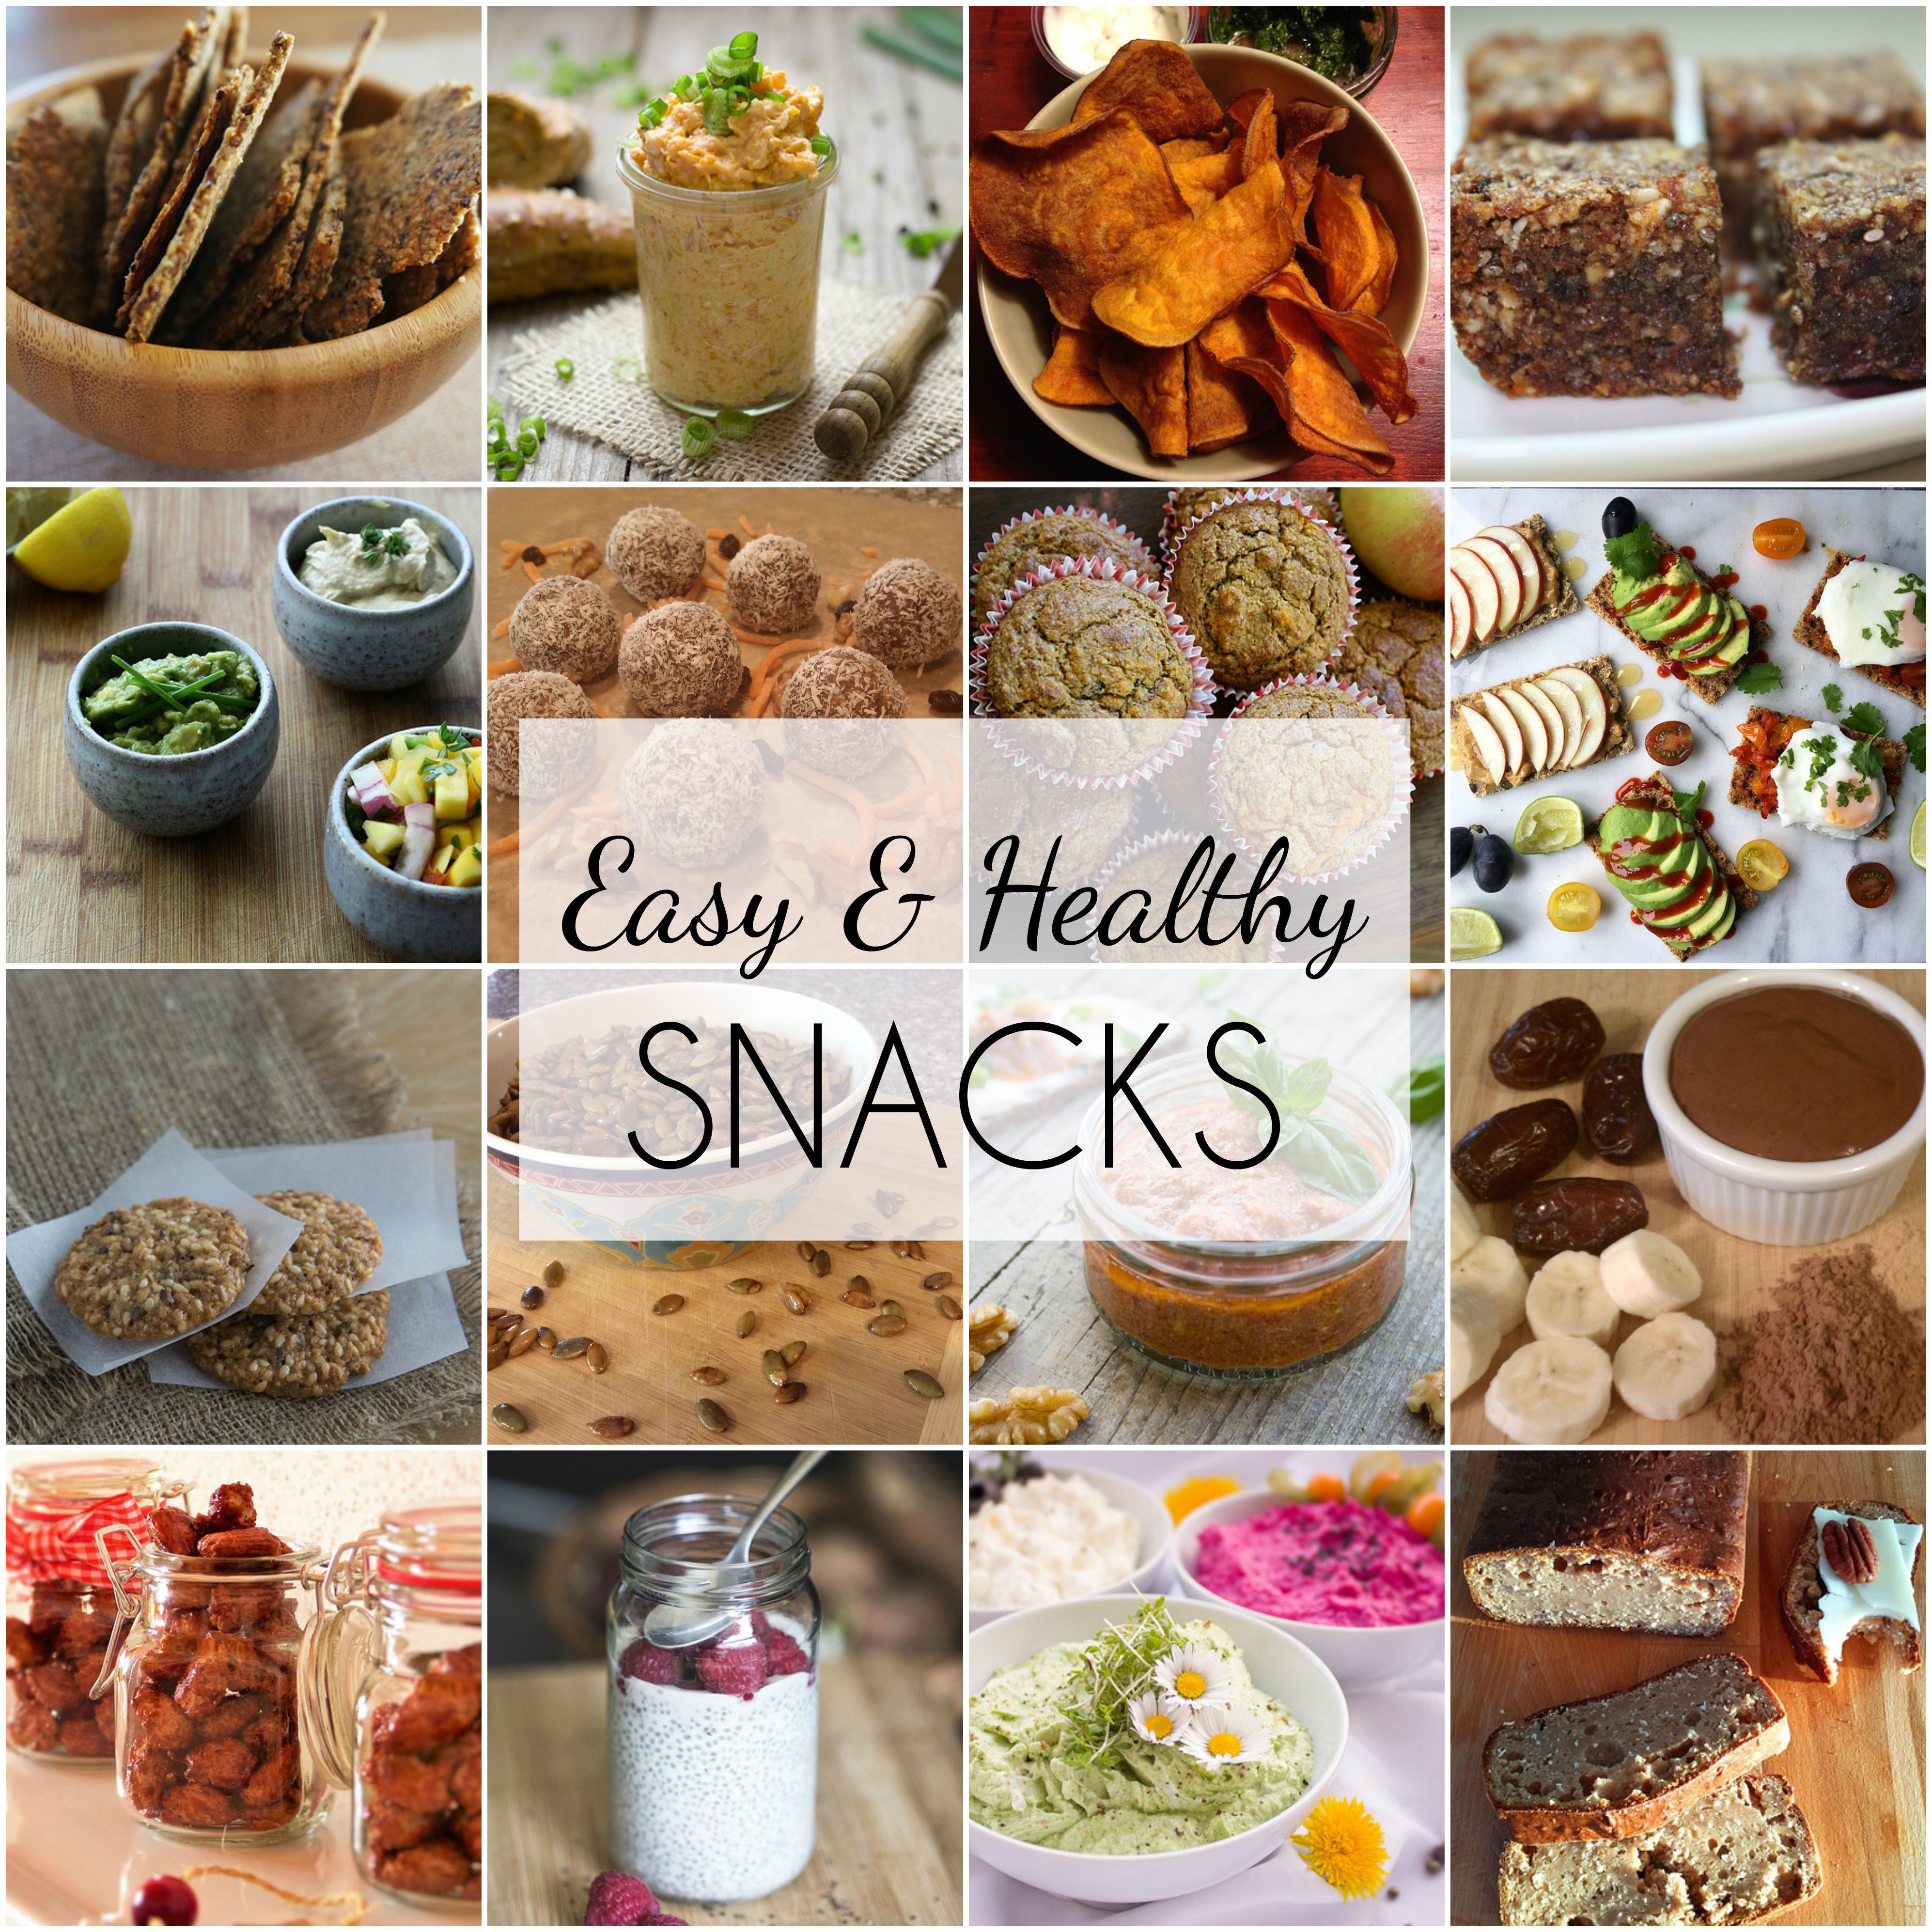 Easy and Healthy Snacks to Help Keep You on Track